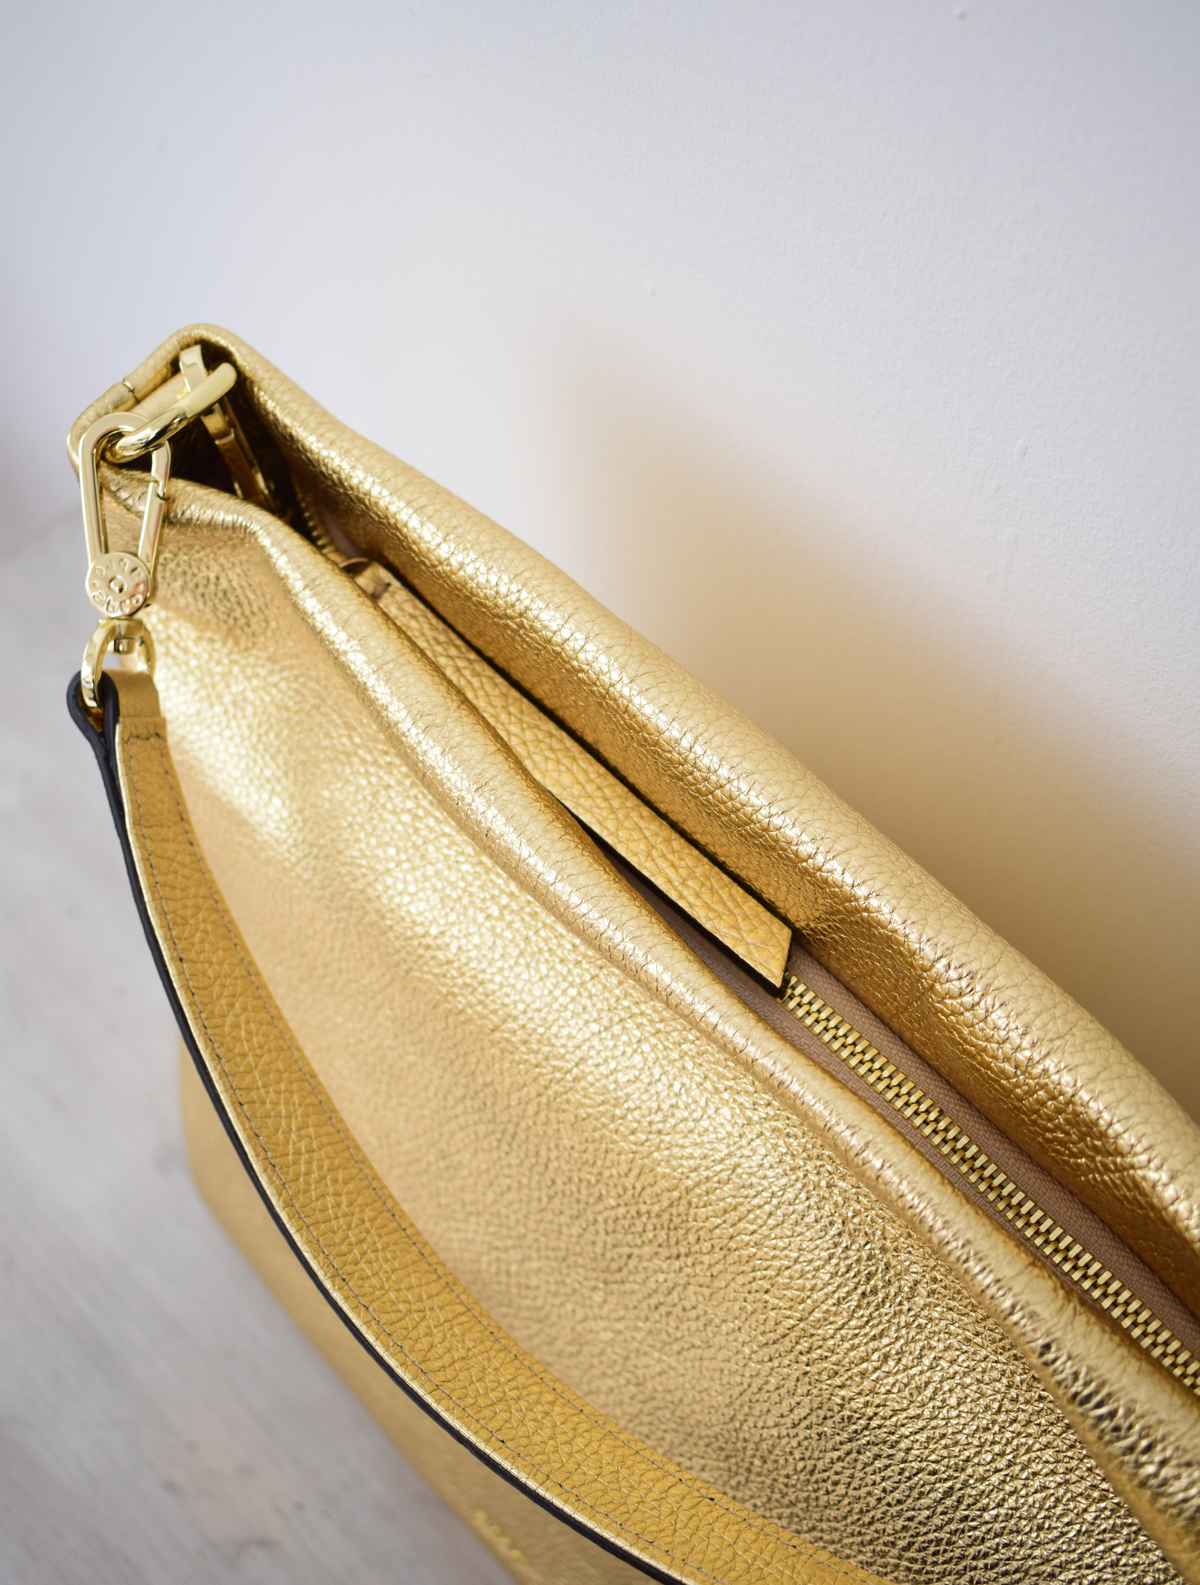 Gold coloured Italian leather handbag with shoulder and cross body strap